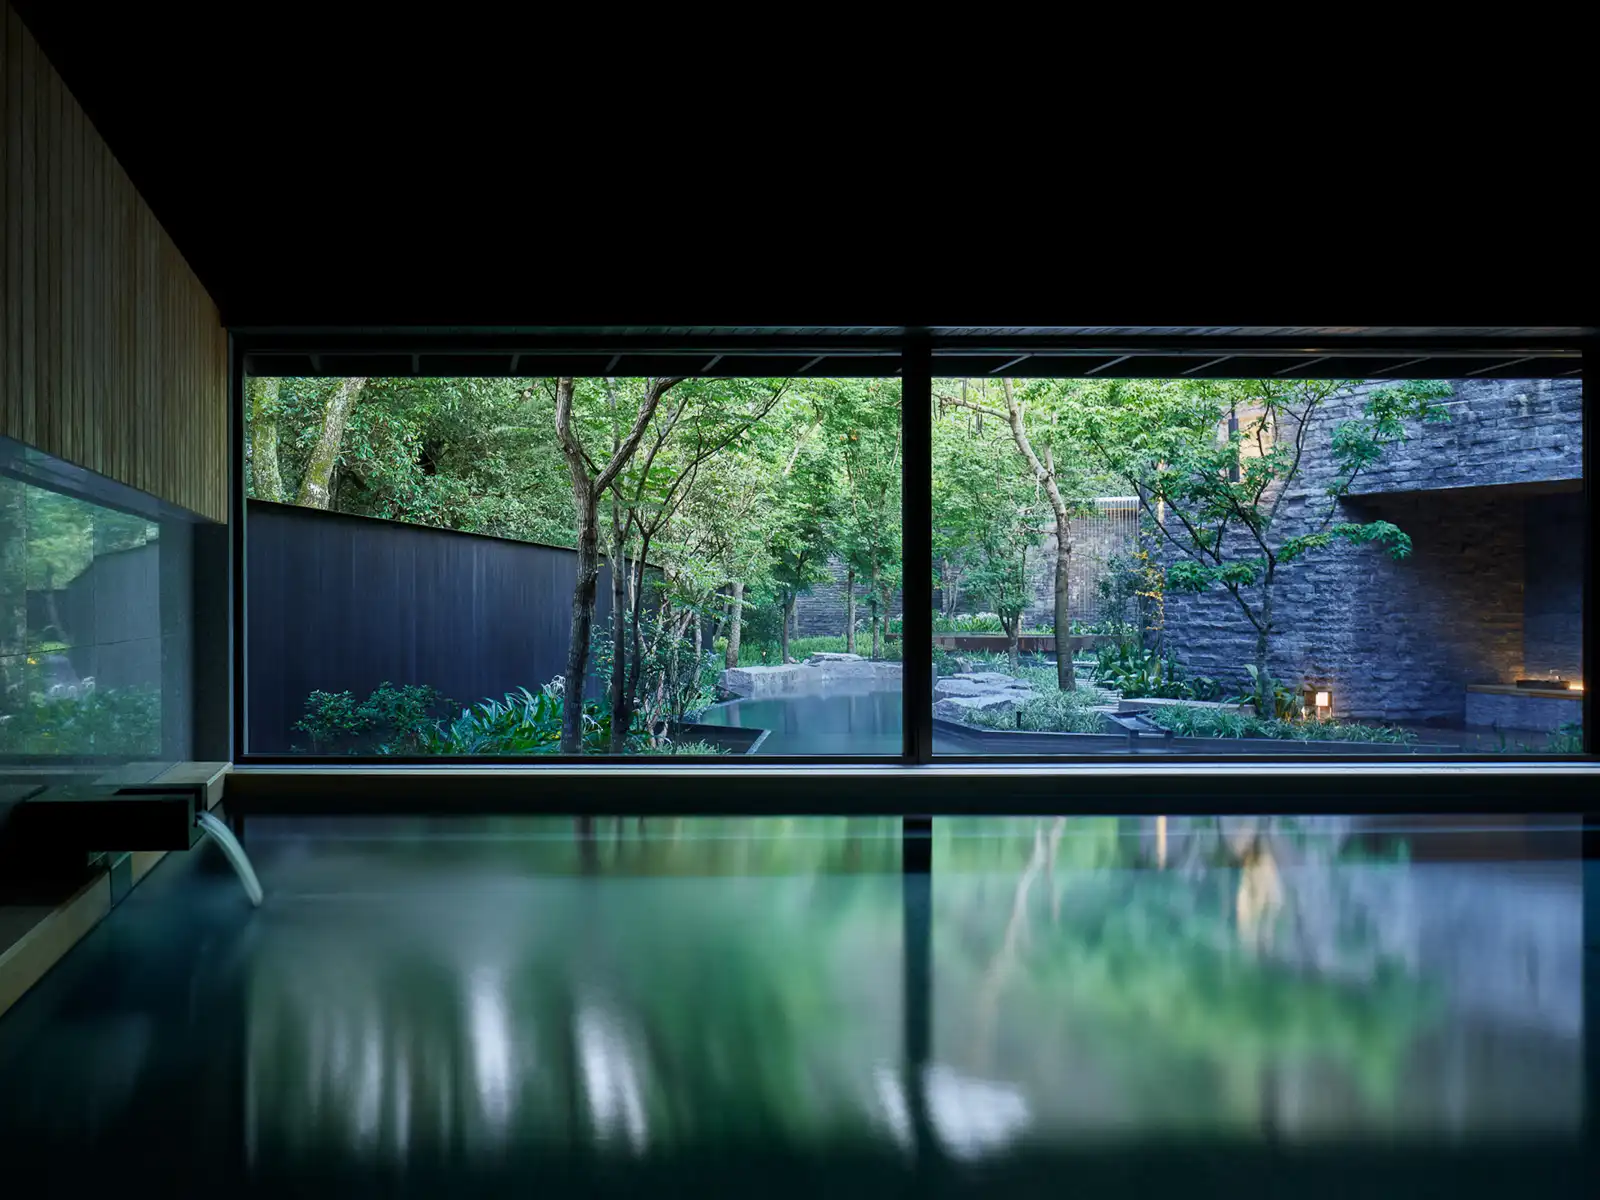 The water in a large indoor bathing pool is perfectly still and the garden can be seen through floor-to-ceiling windows.